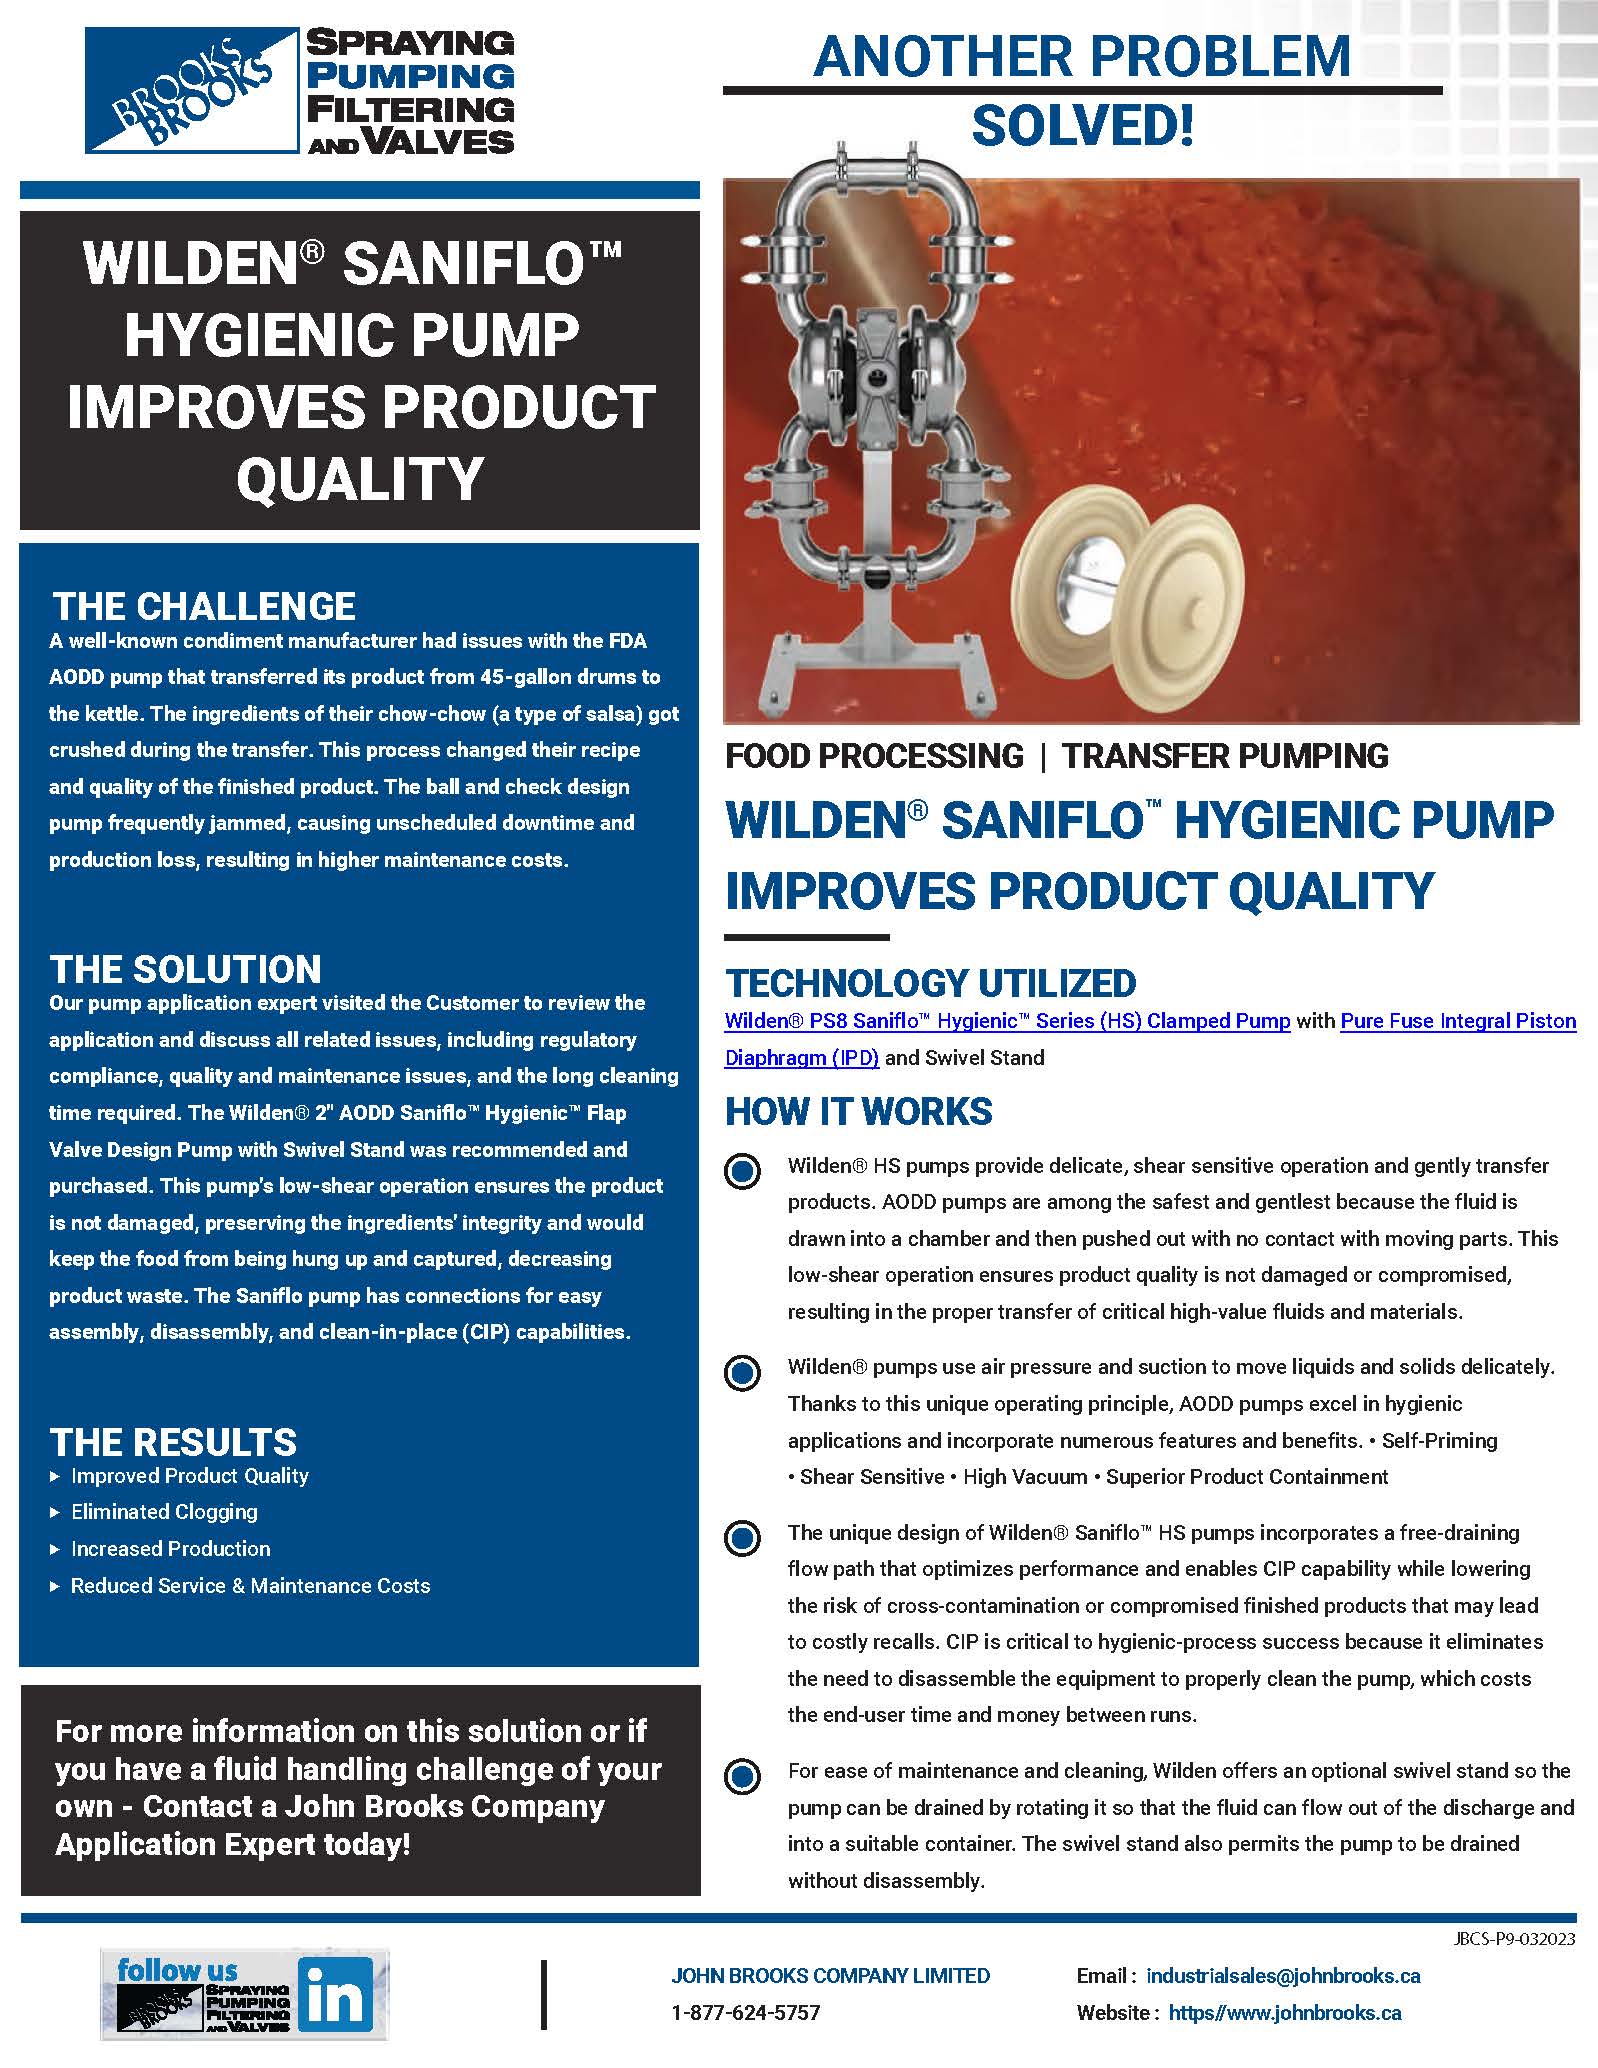 Improved Food Product Quality with Hygienic Pumps from Wilden